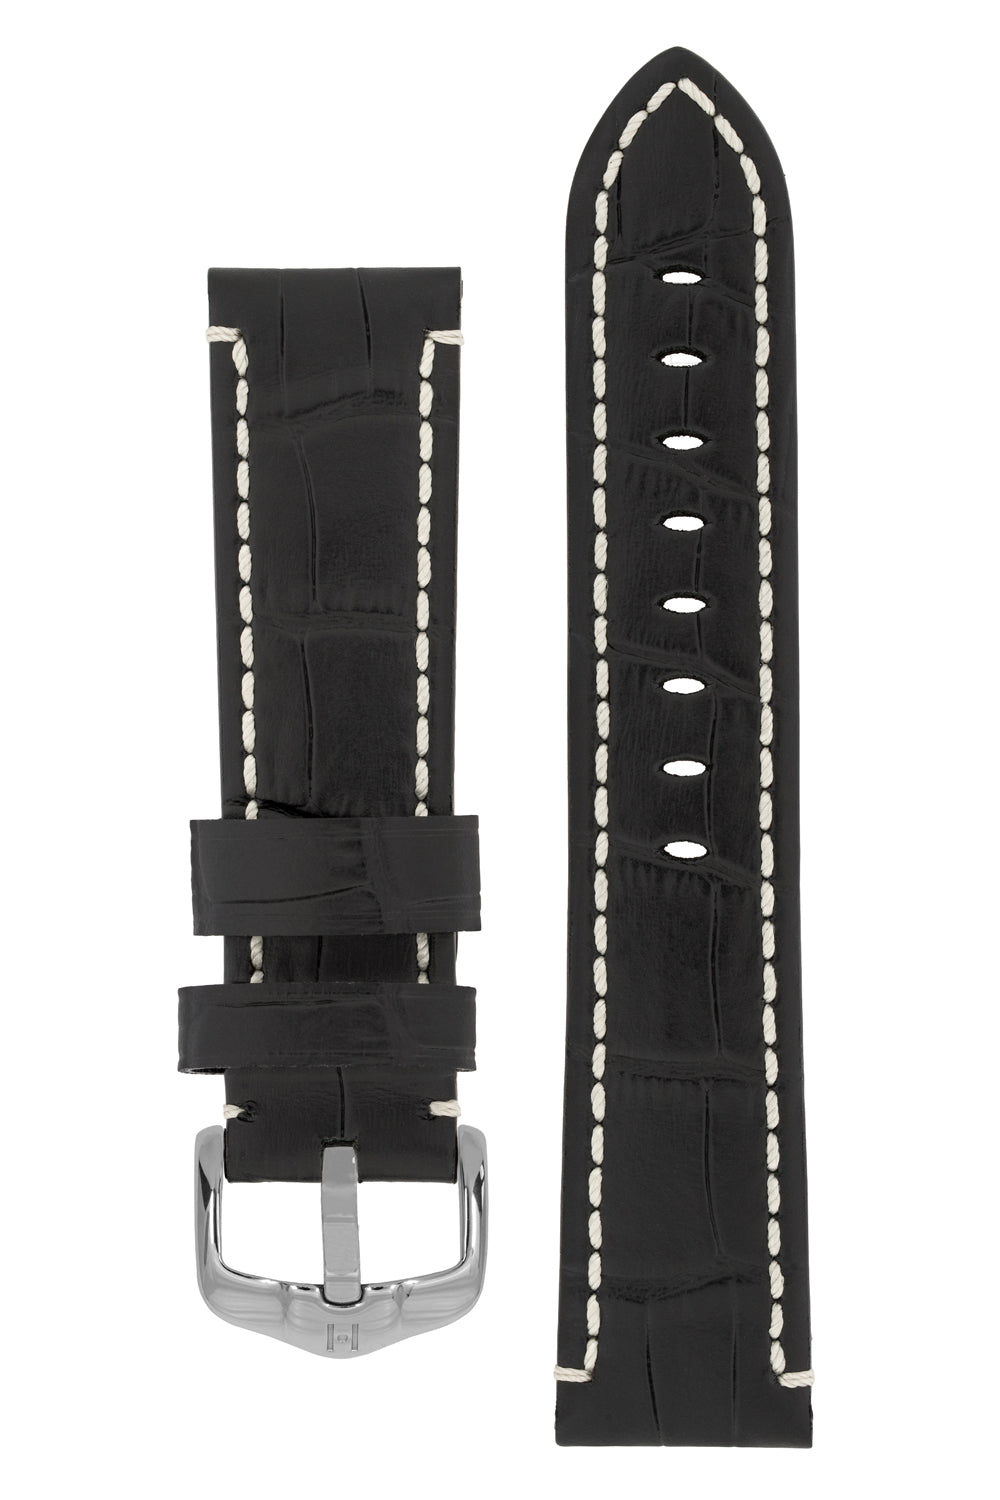 Hirsch Knight Alligator Embossed Leather Watch Strap in Black (with Polished Silver Steel H-Active Buckle)